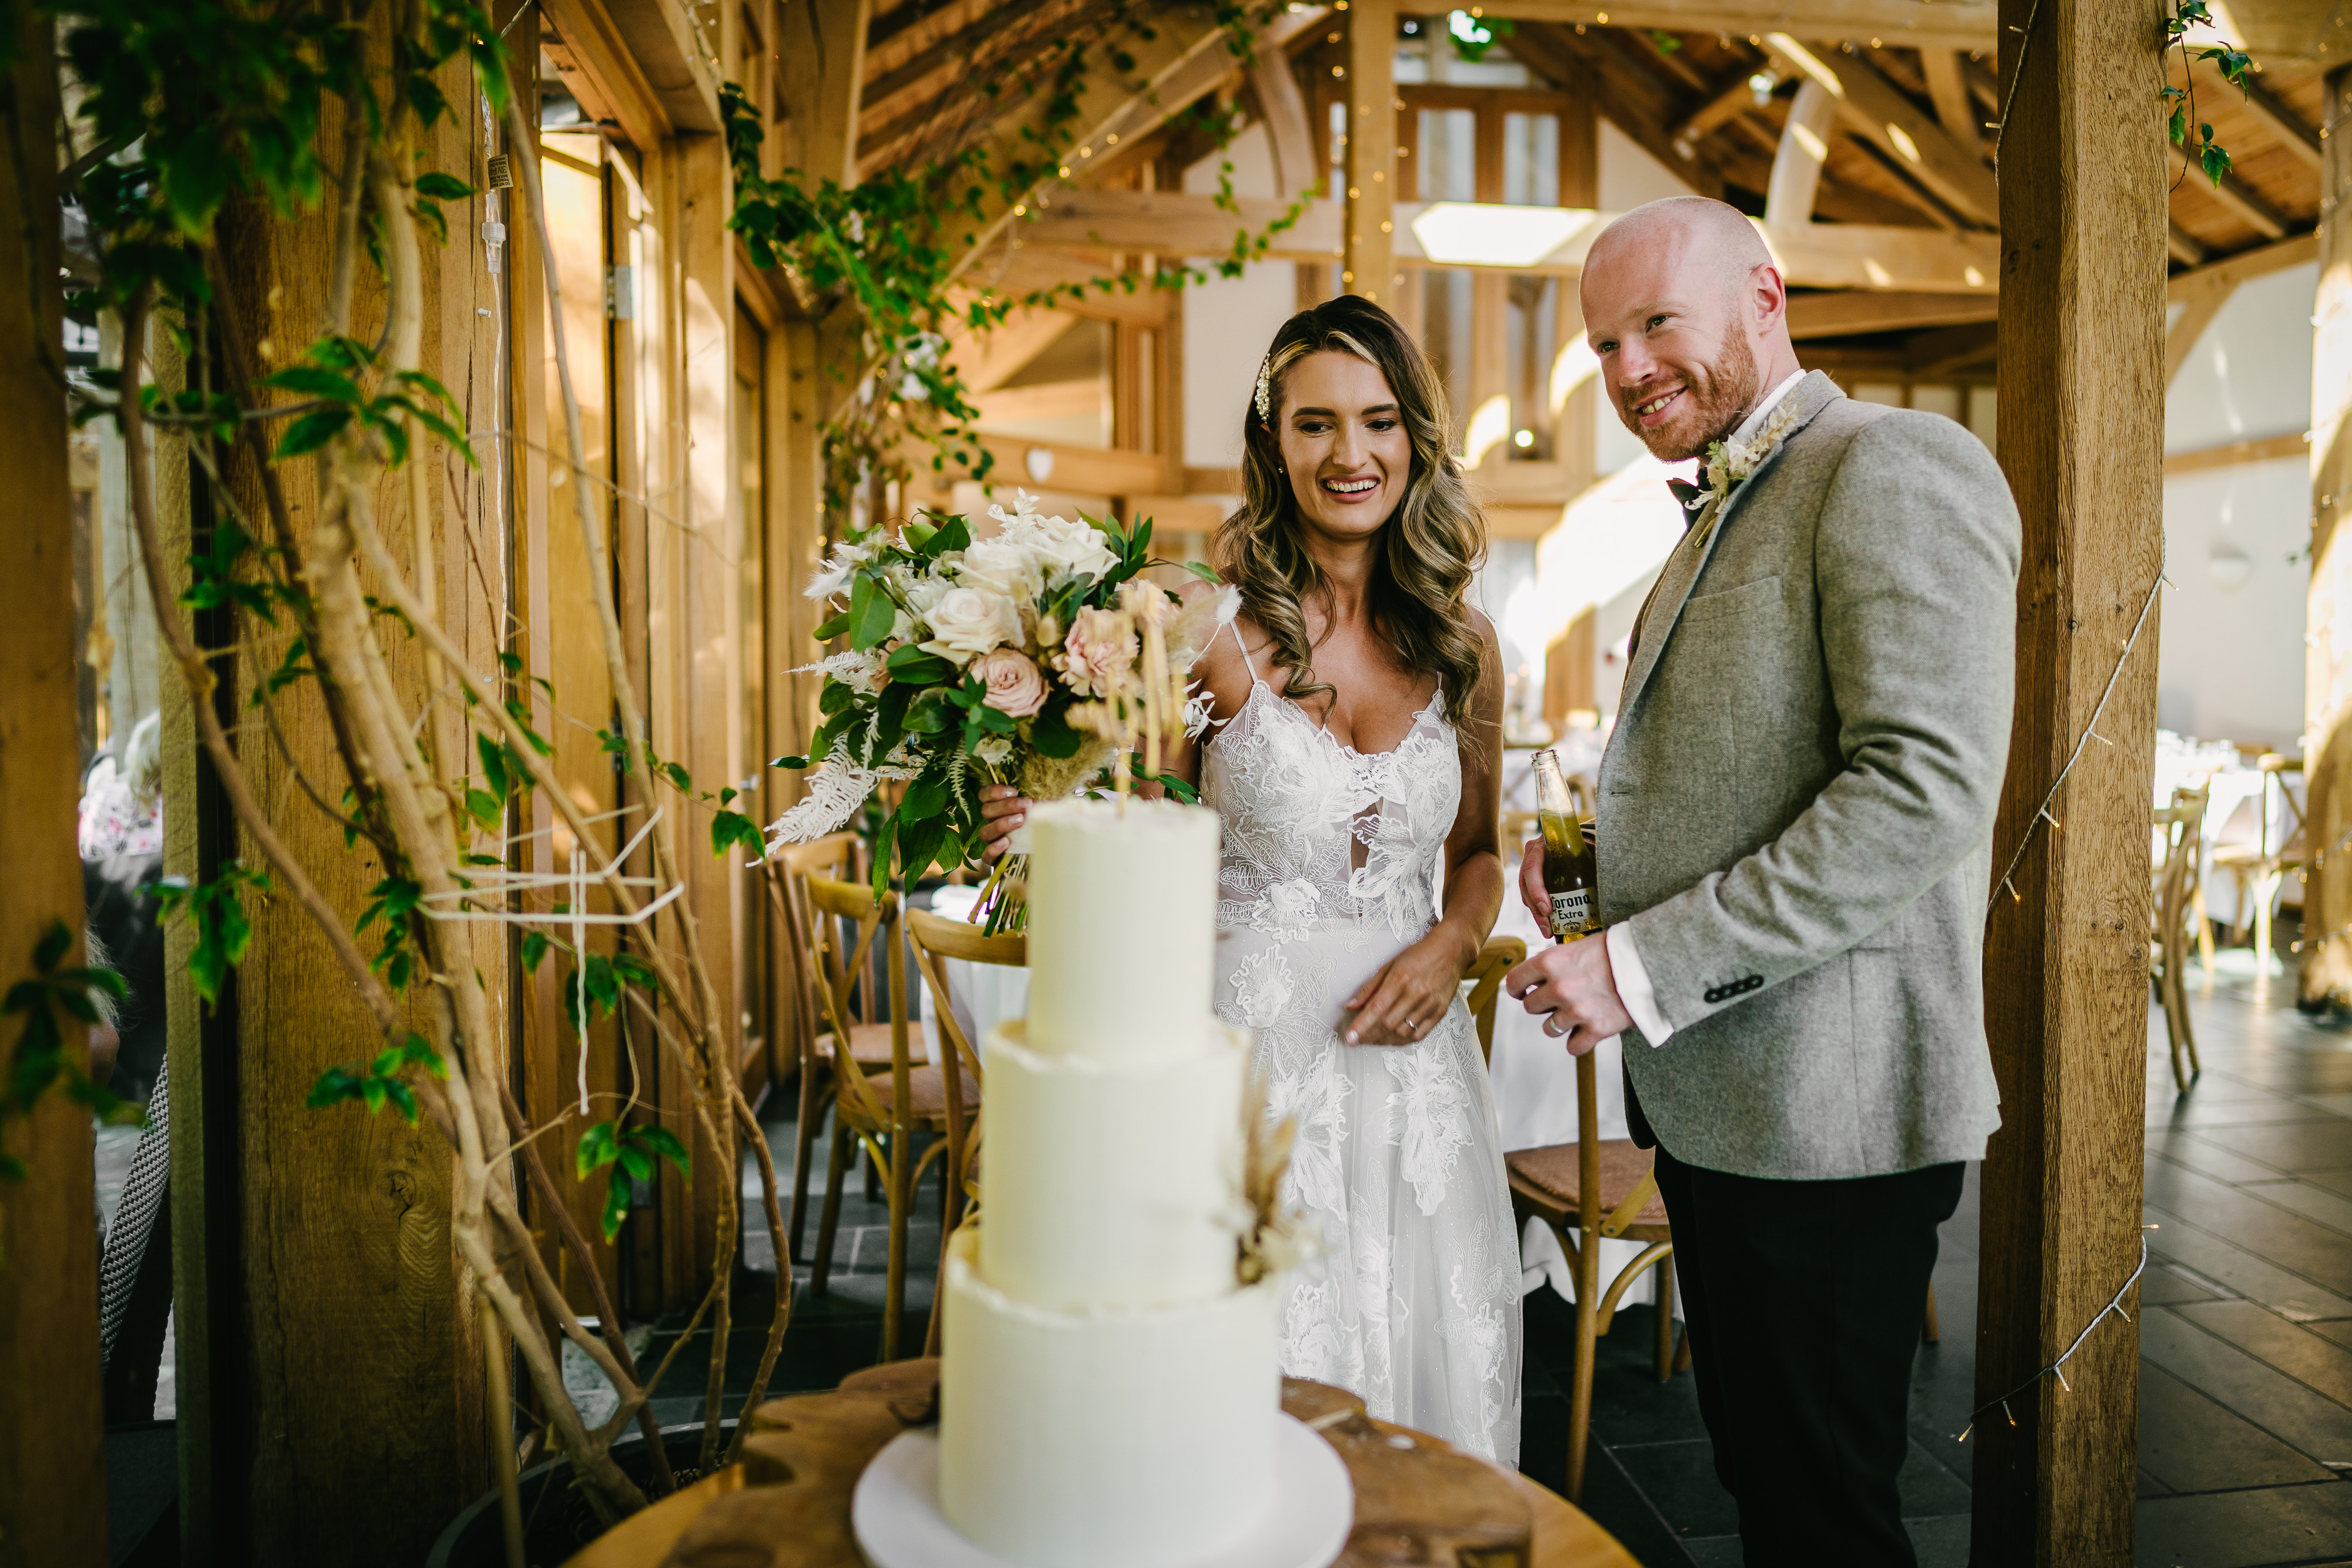 Kirsty & Chris At The Oak Tree Of Peover